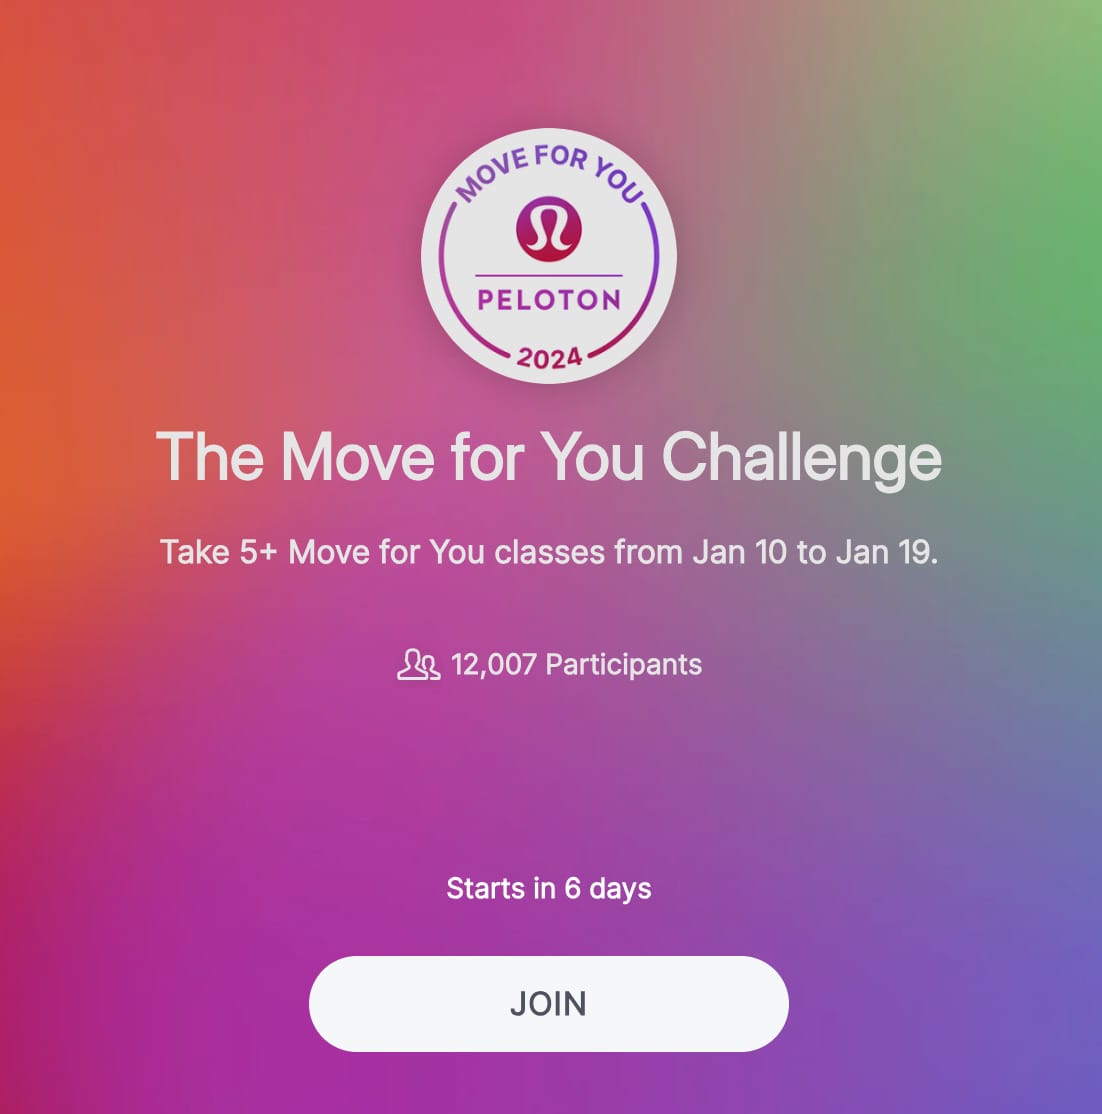 The Move for You Challenge